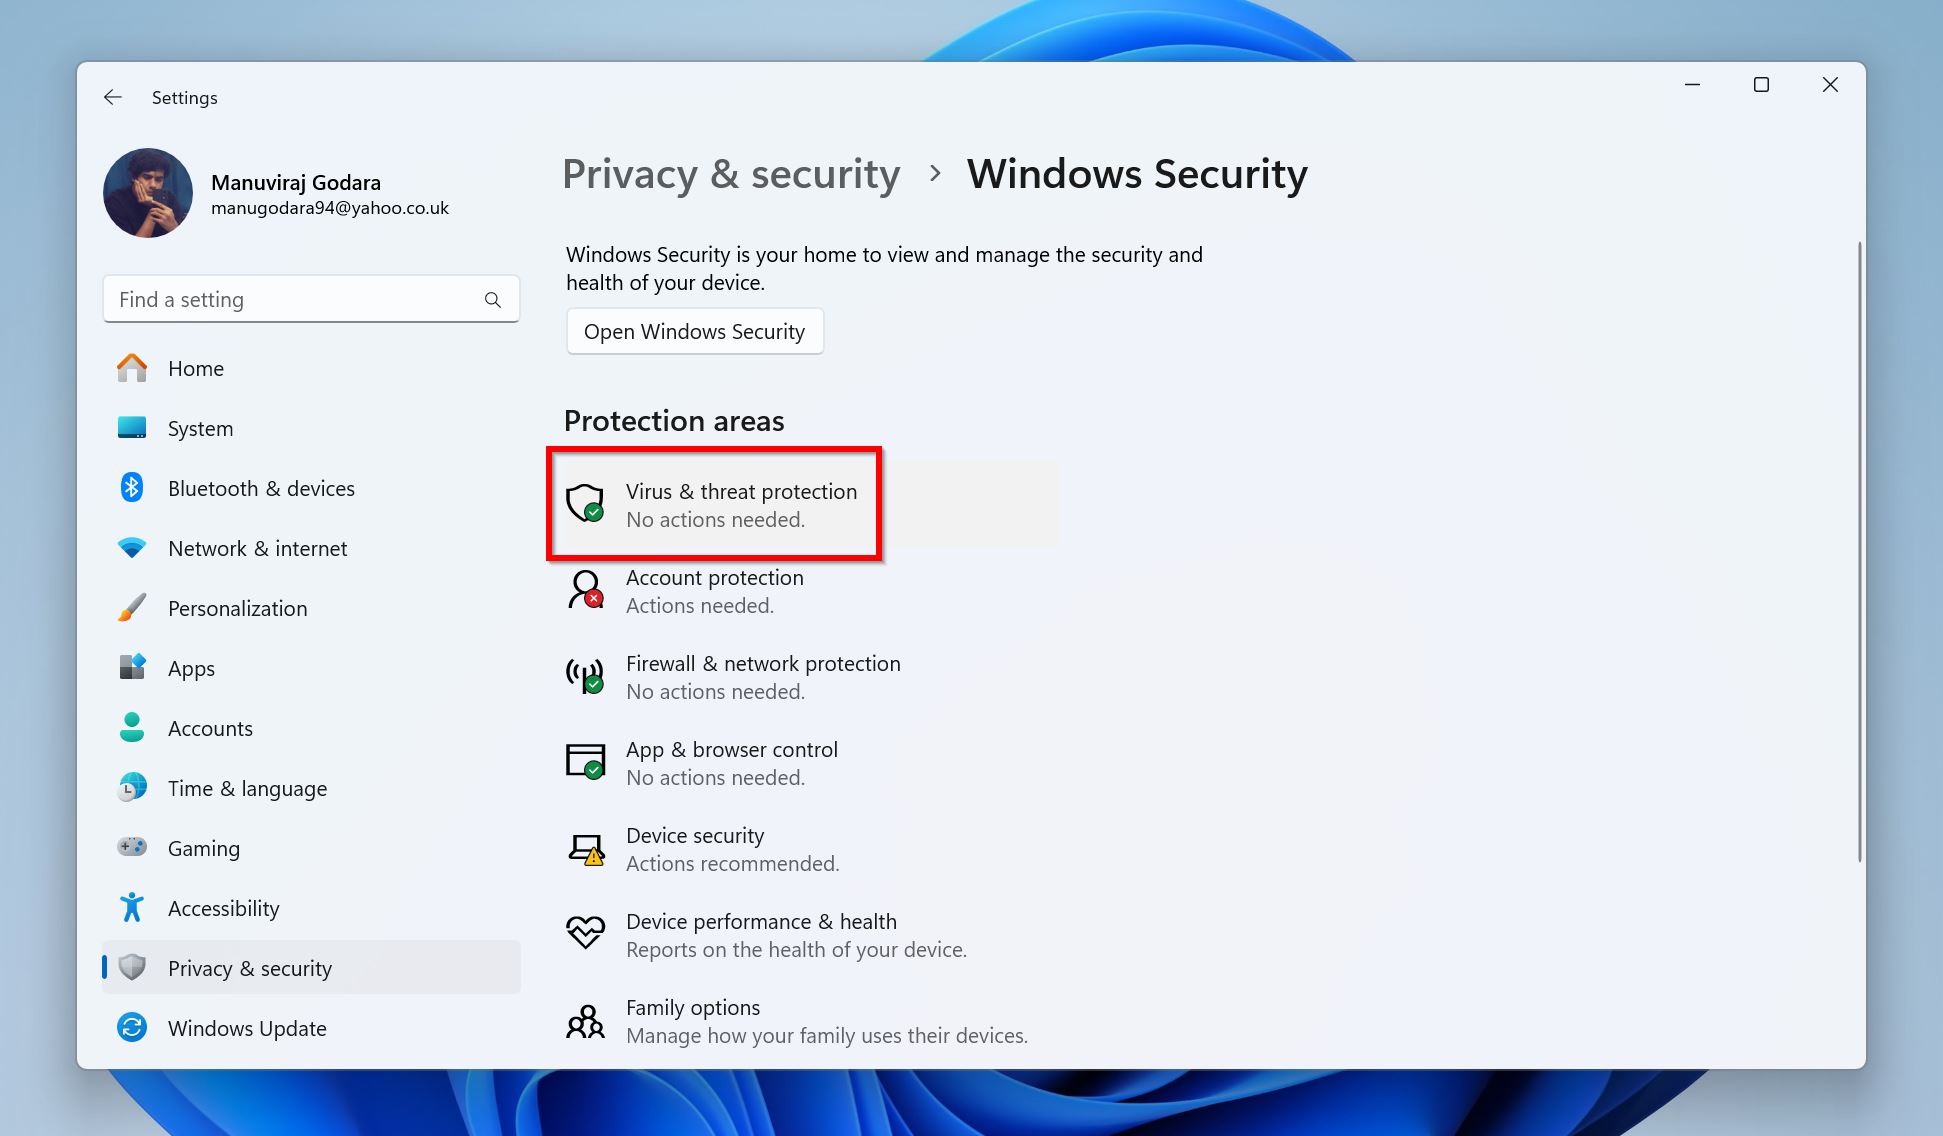  Windows Settings with Privacy & security section open, showing Virus & threat protection as having no actions needed.